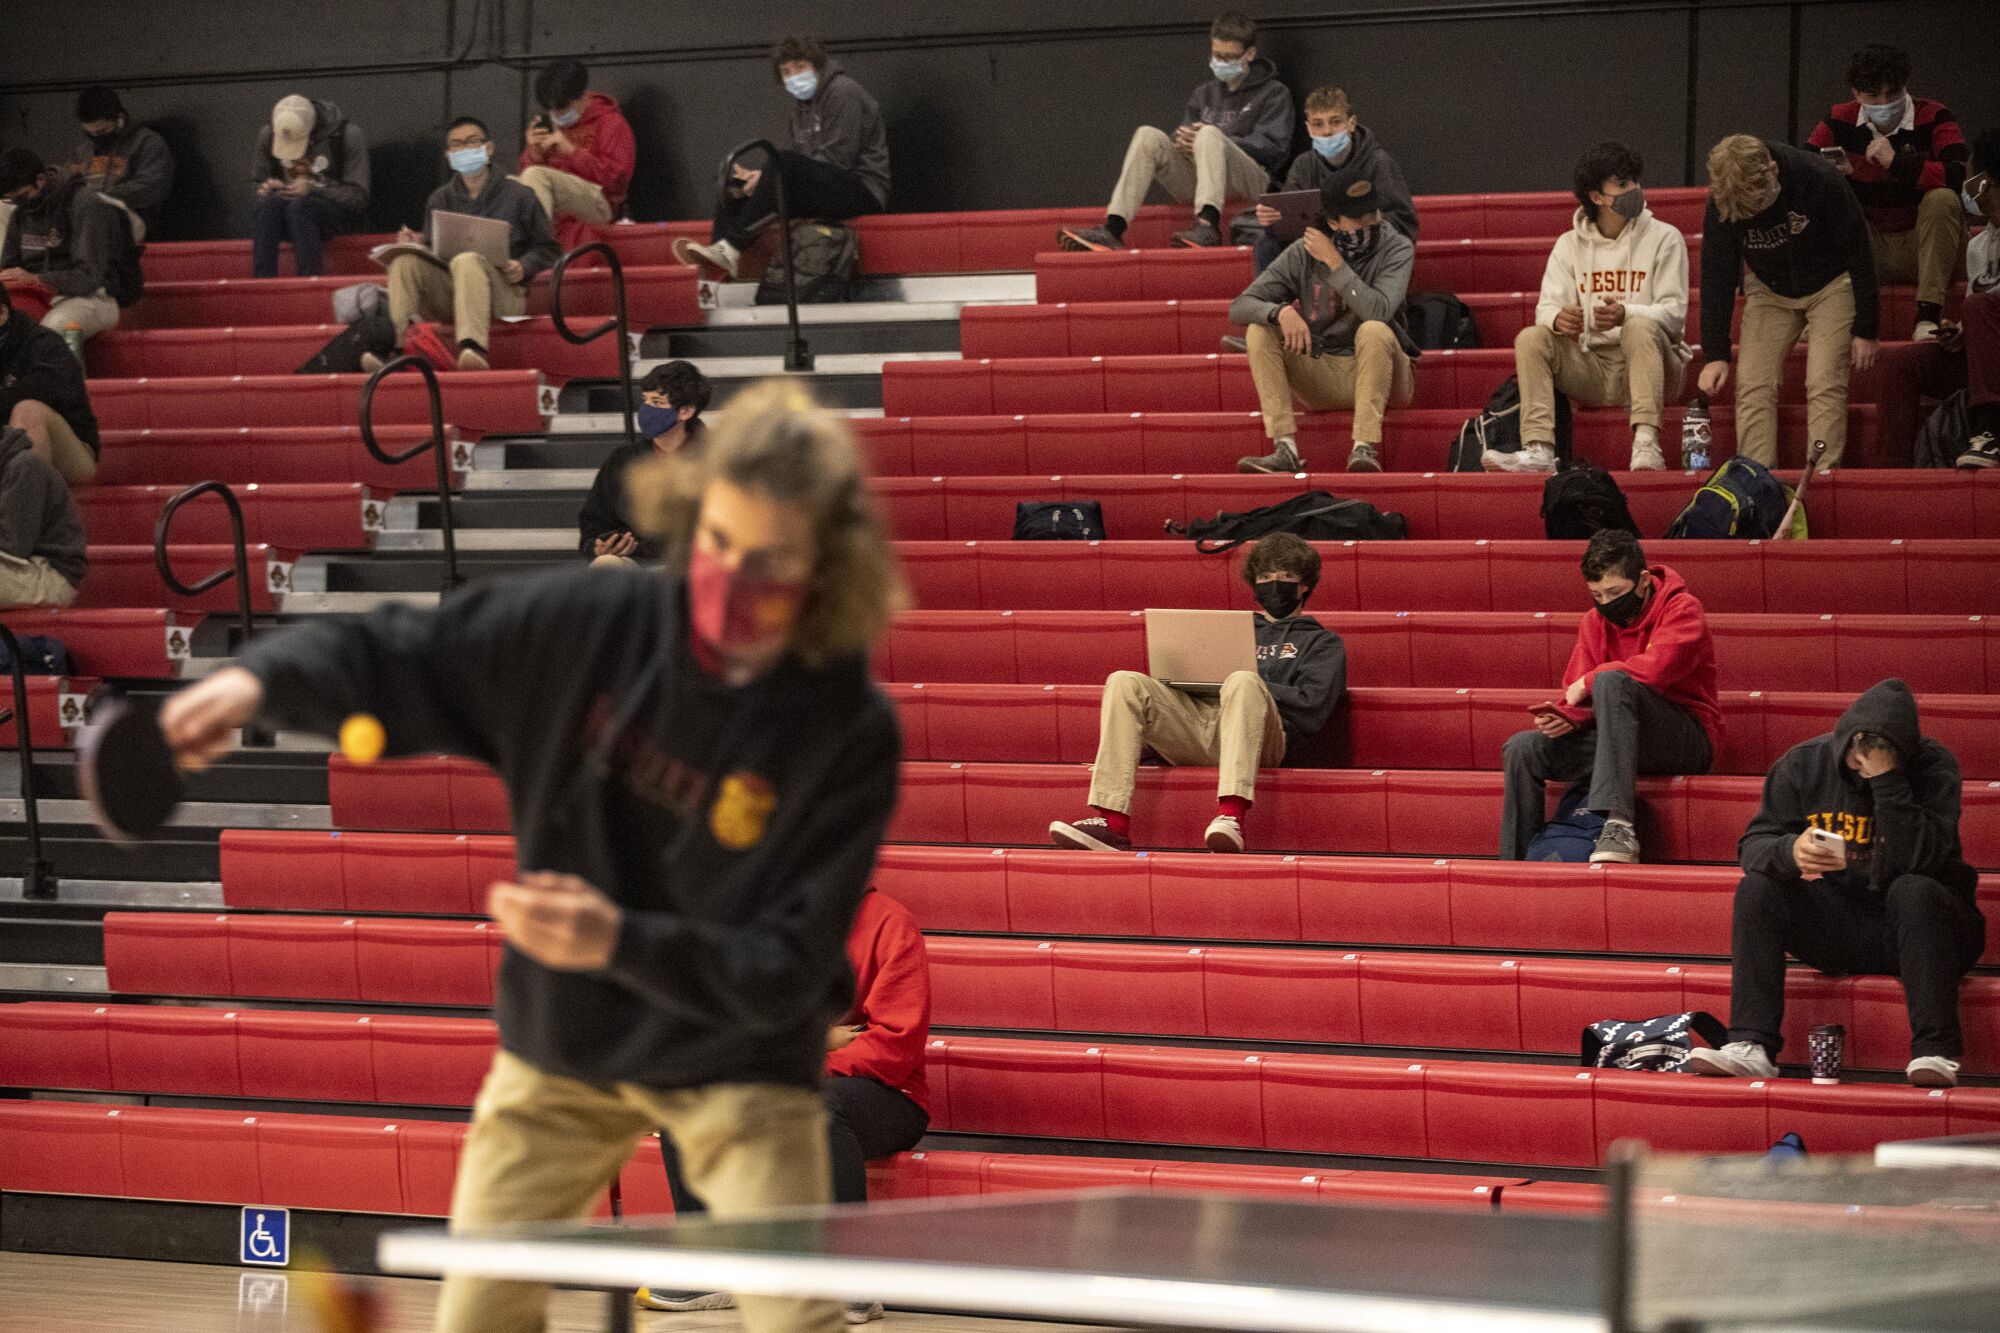 A student plays pingpong while others sit in the school gymnasium bleachers.